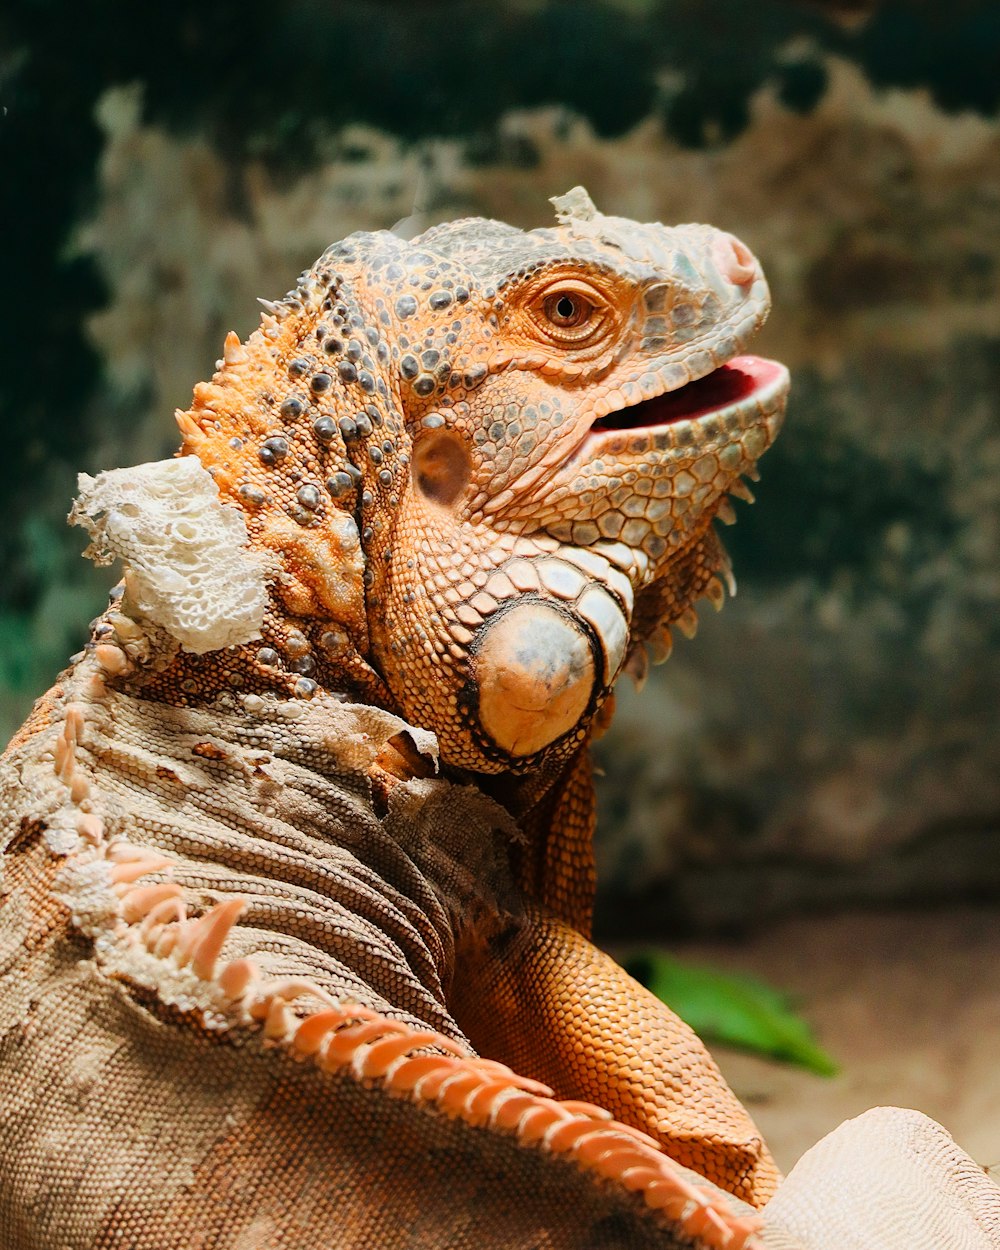 a lizard with a large mouth